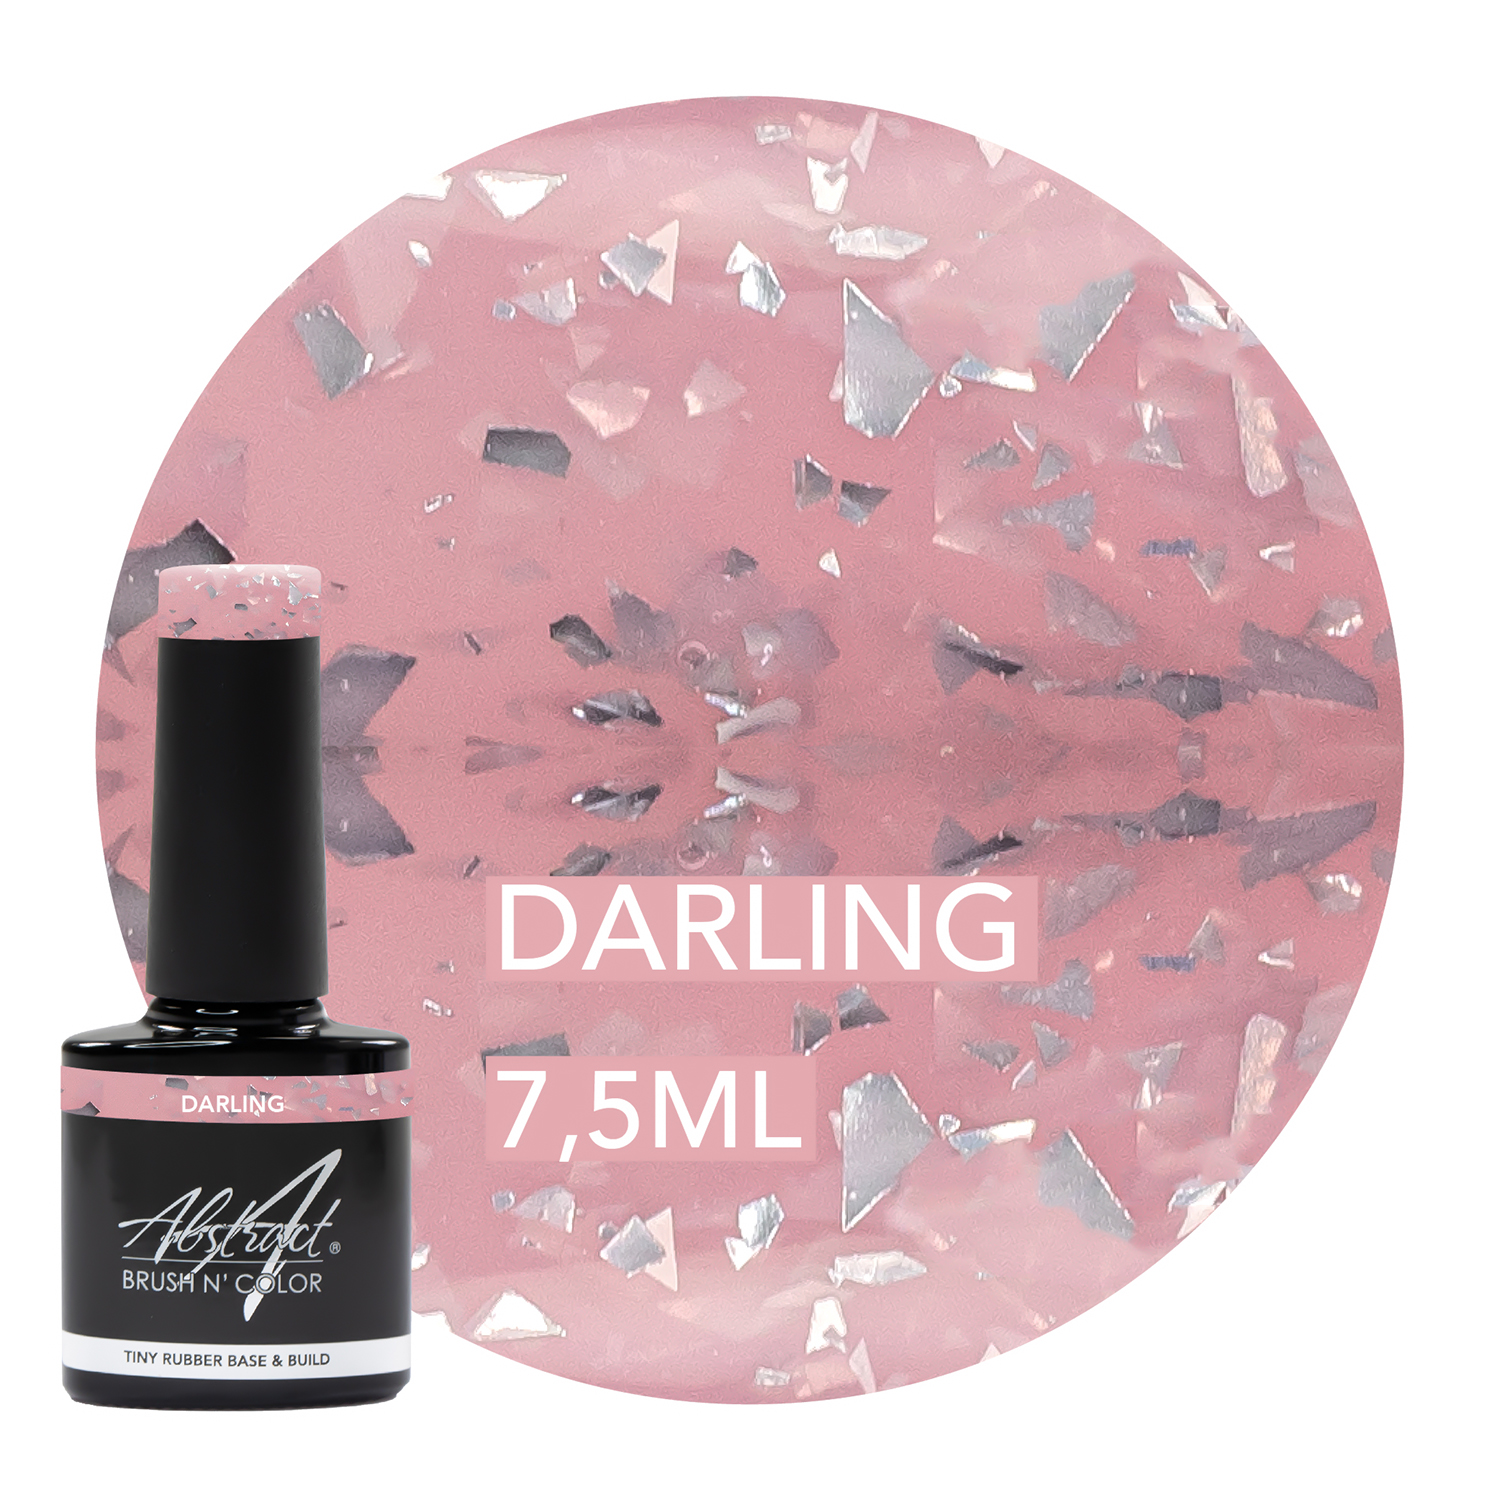 Rubber Base & Build Dazzling Darling 7,5ml, Abstract | 151003